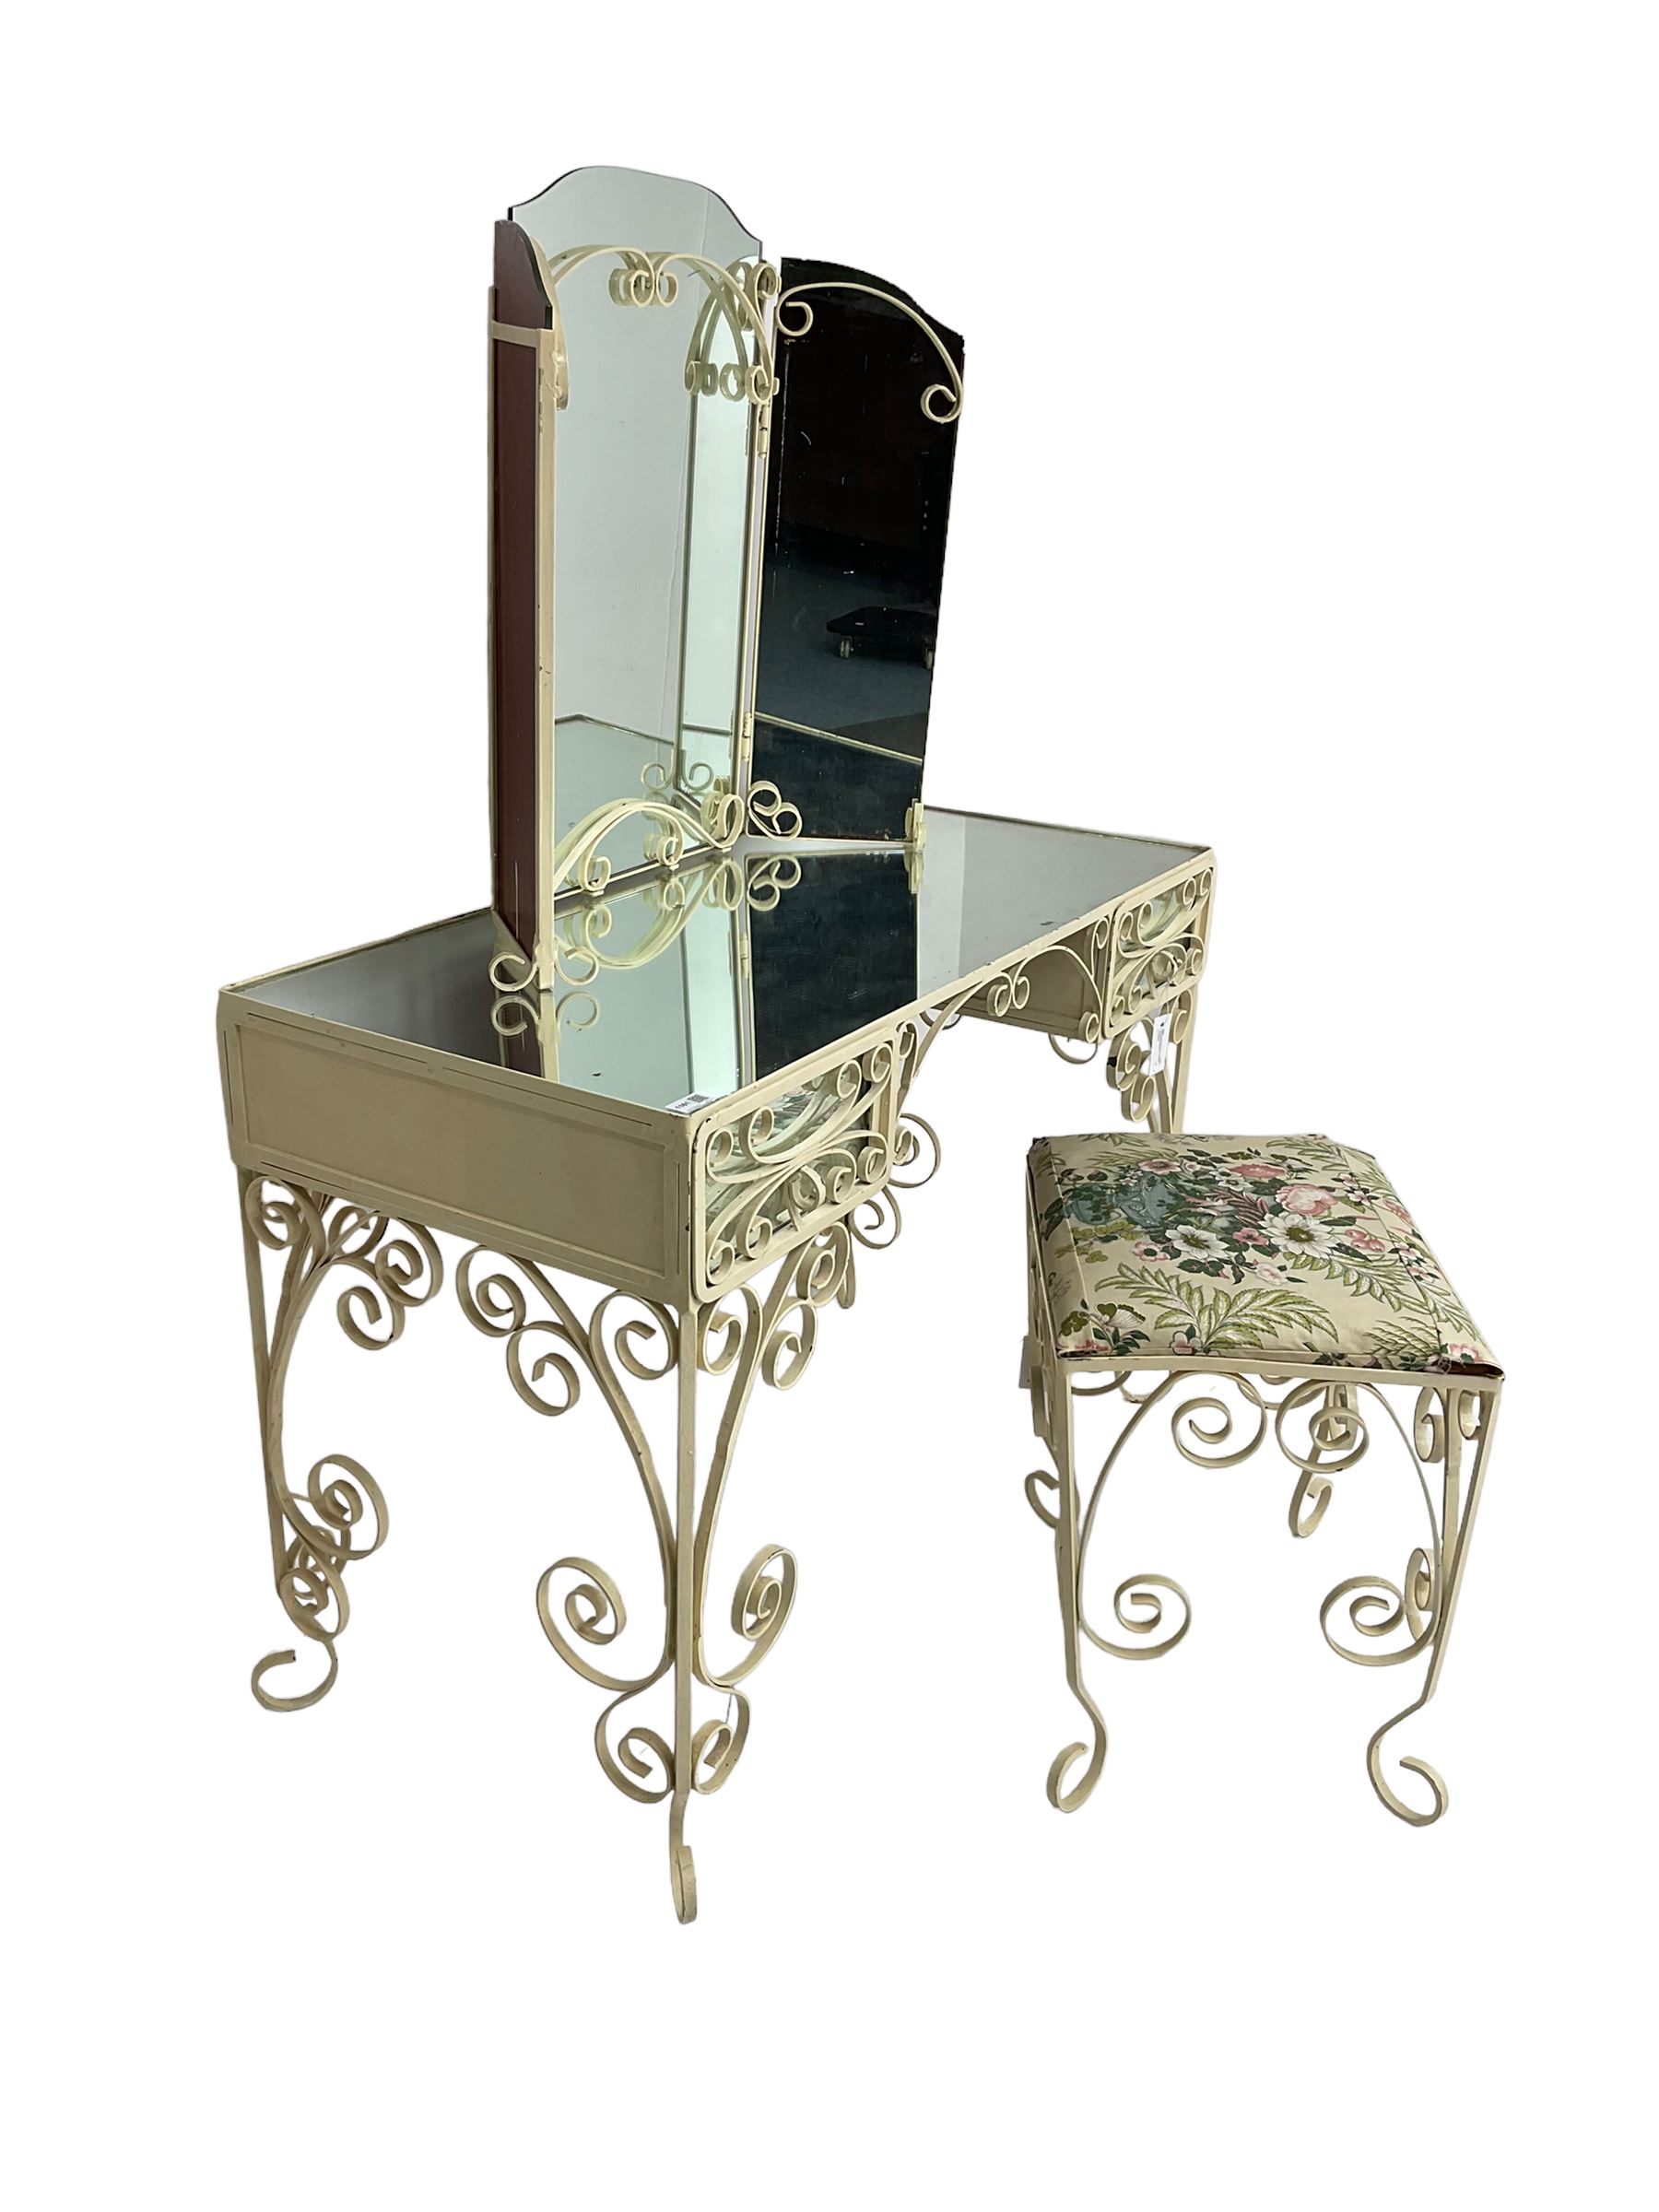 Cream painted scroll work wrought metal dressing table - Image 3 of 4